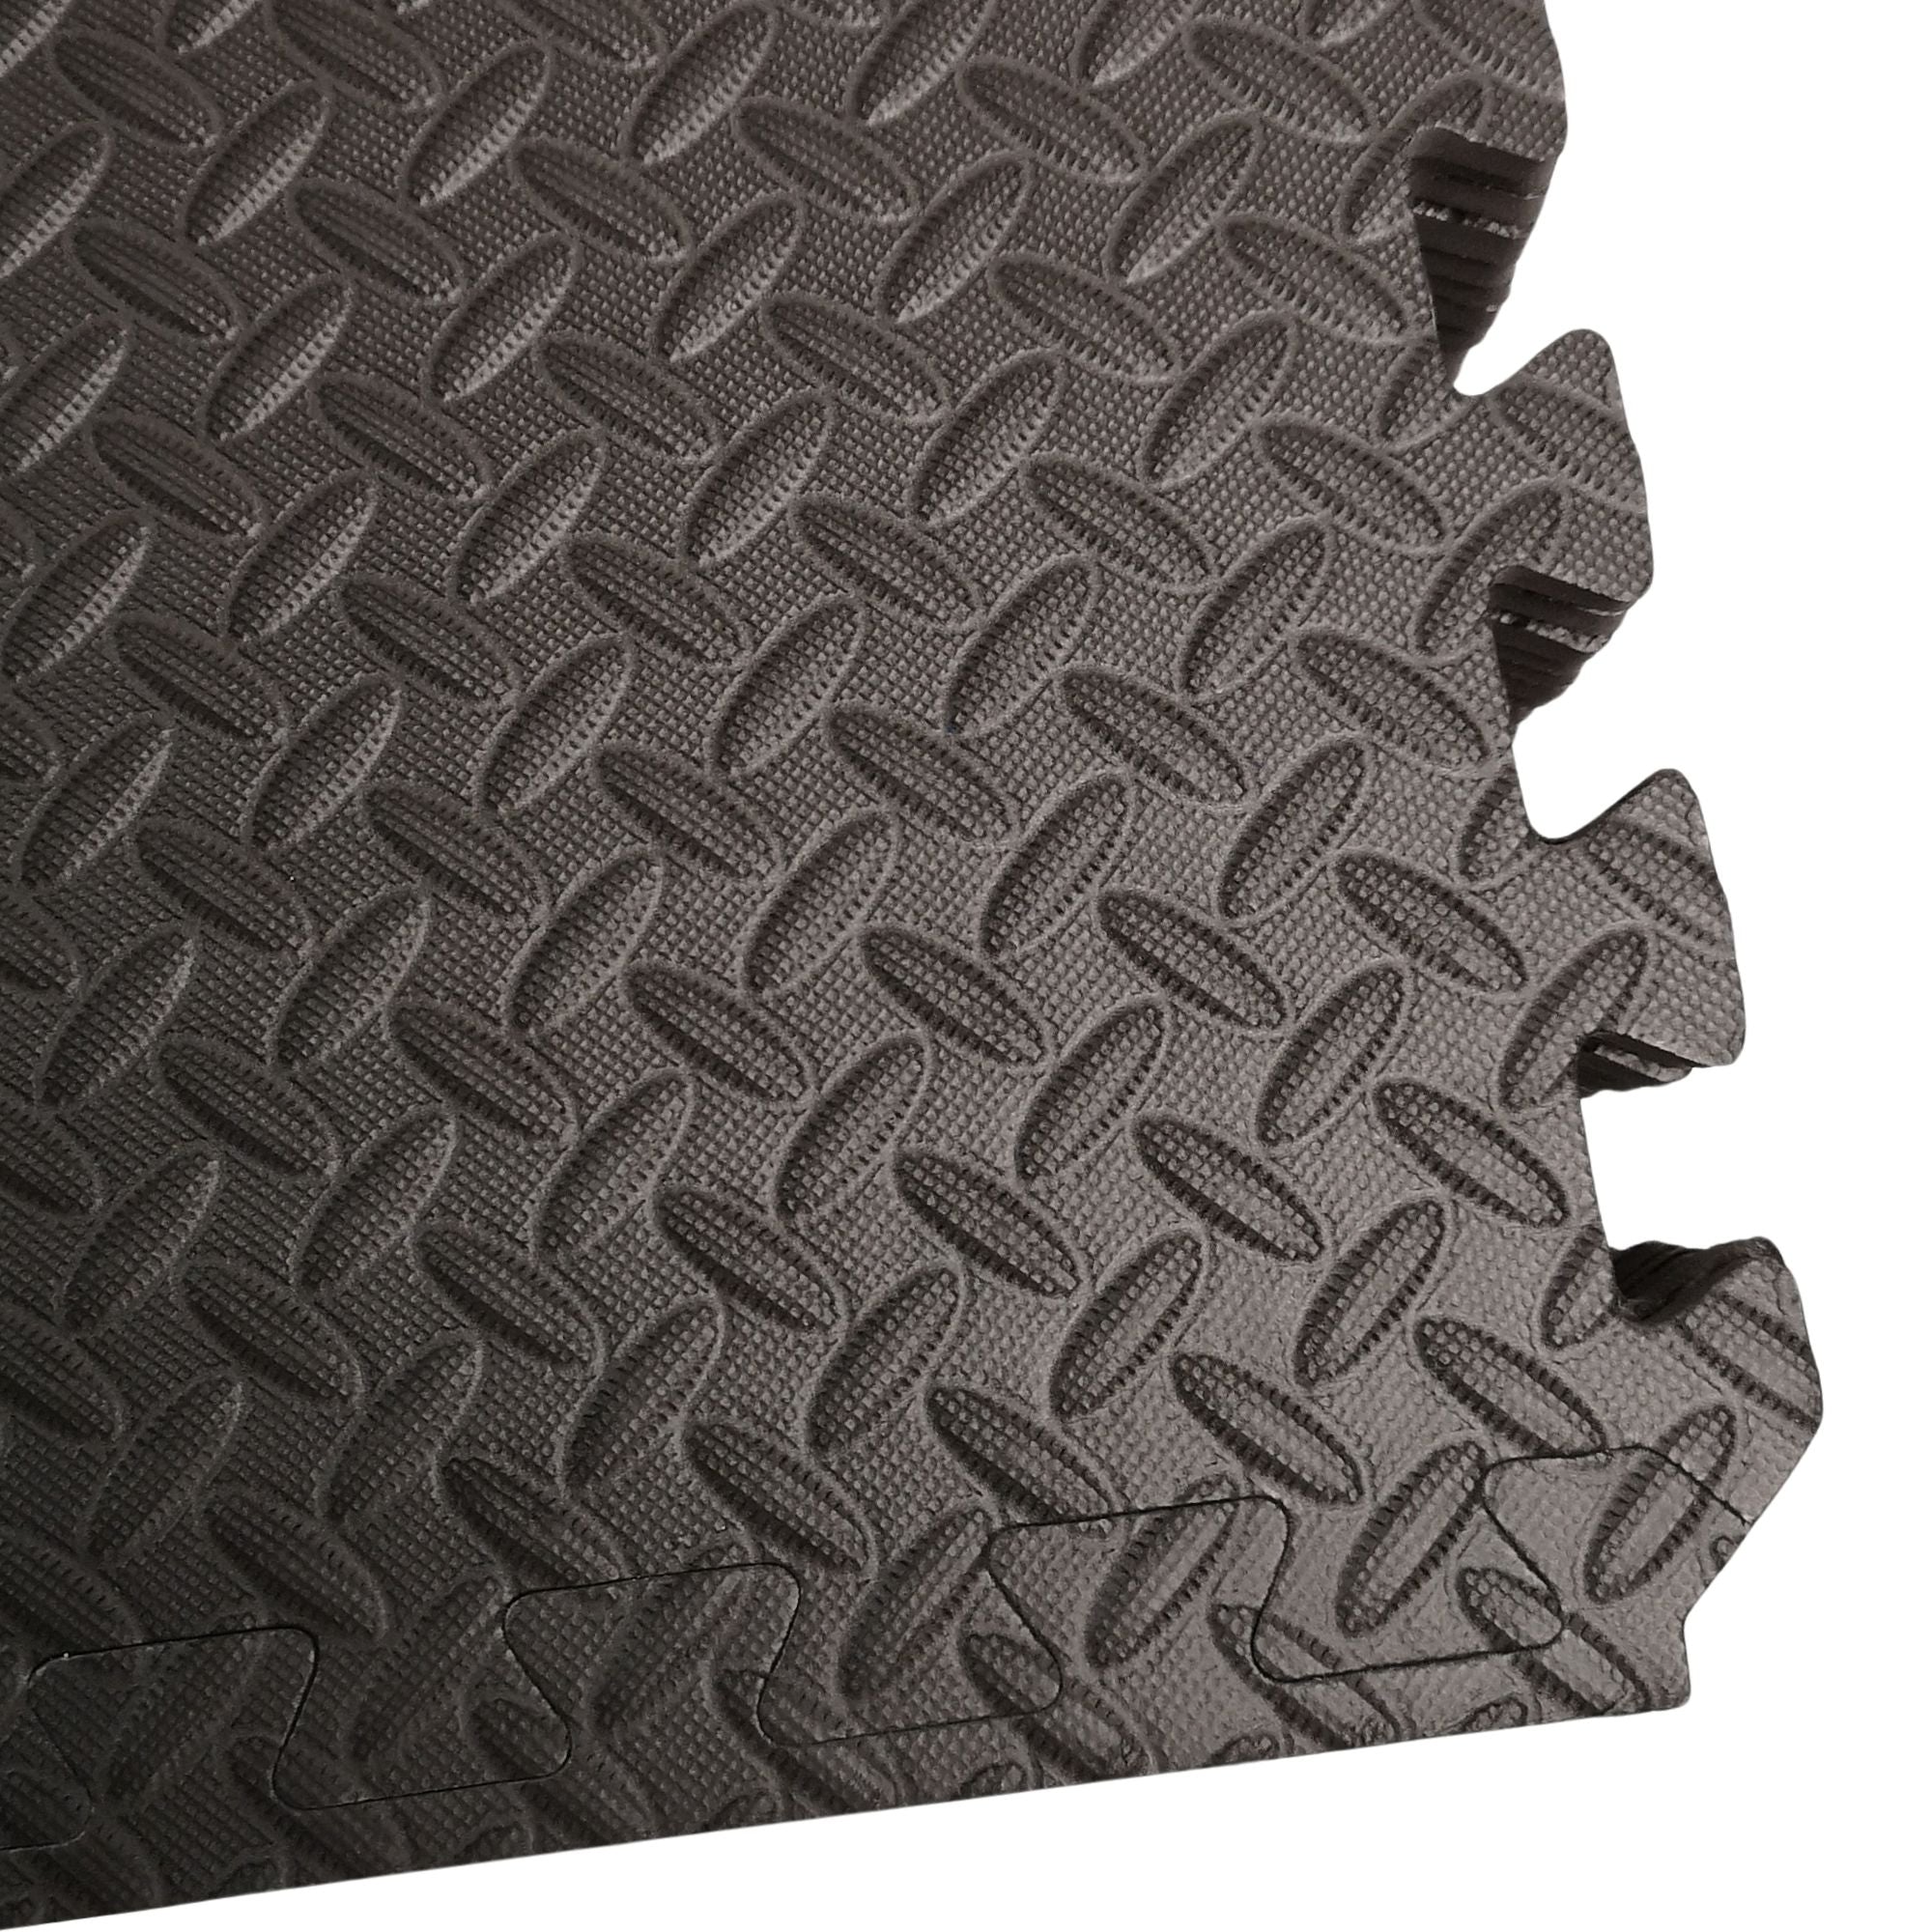 8 Piece EVA Foam Floor Protective Floor Tiles / Mats 60x60cm each For Gyms, Garages, Camping, Kids Play Matting, Hot Tub Flooring Mats And Much More! Set Covers 2.88 sqm (31 sq ft)